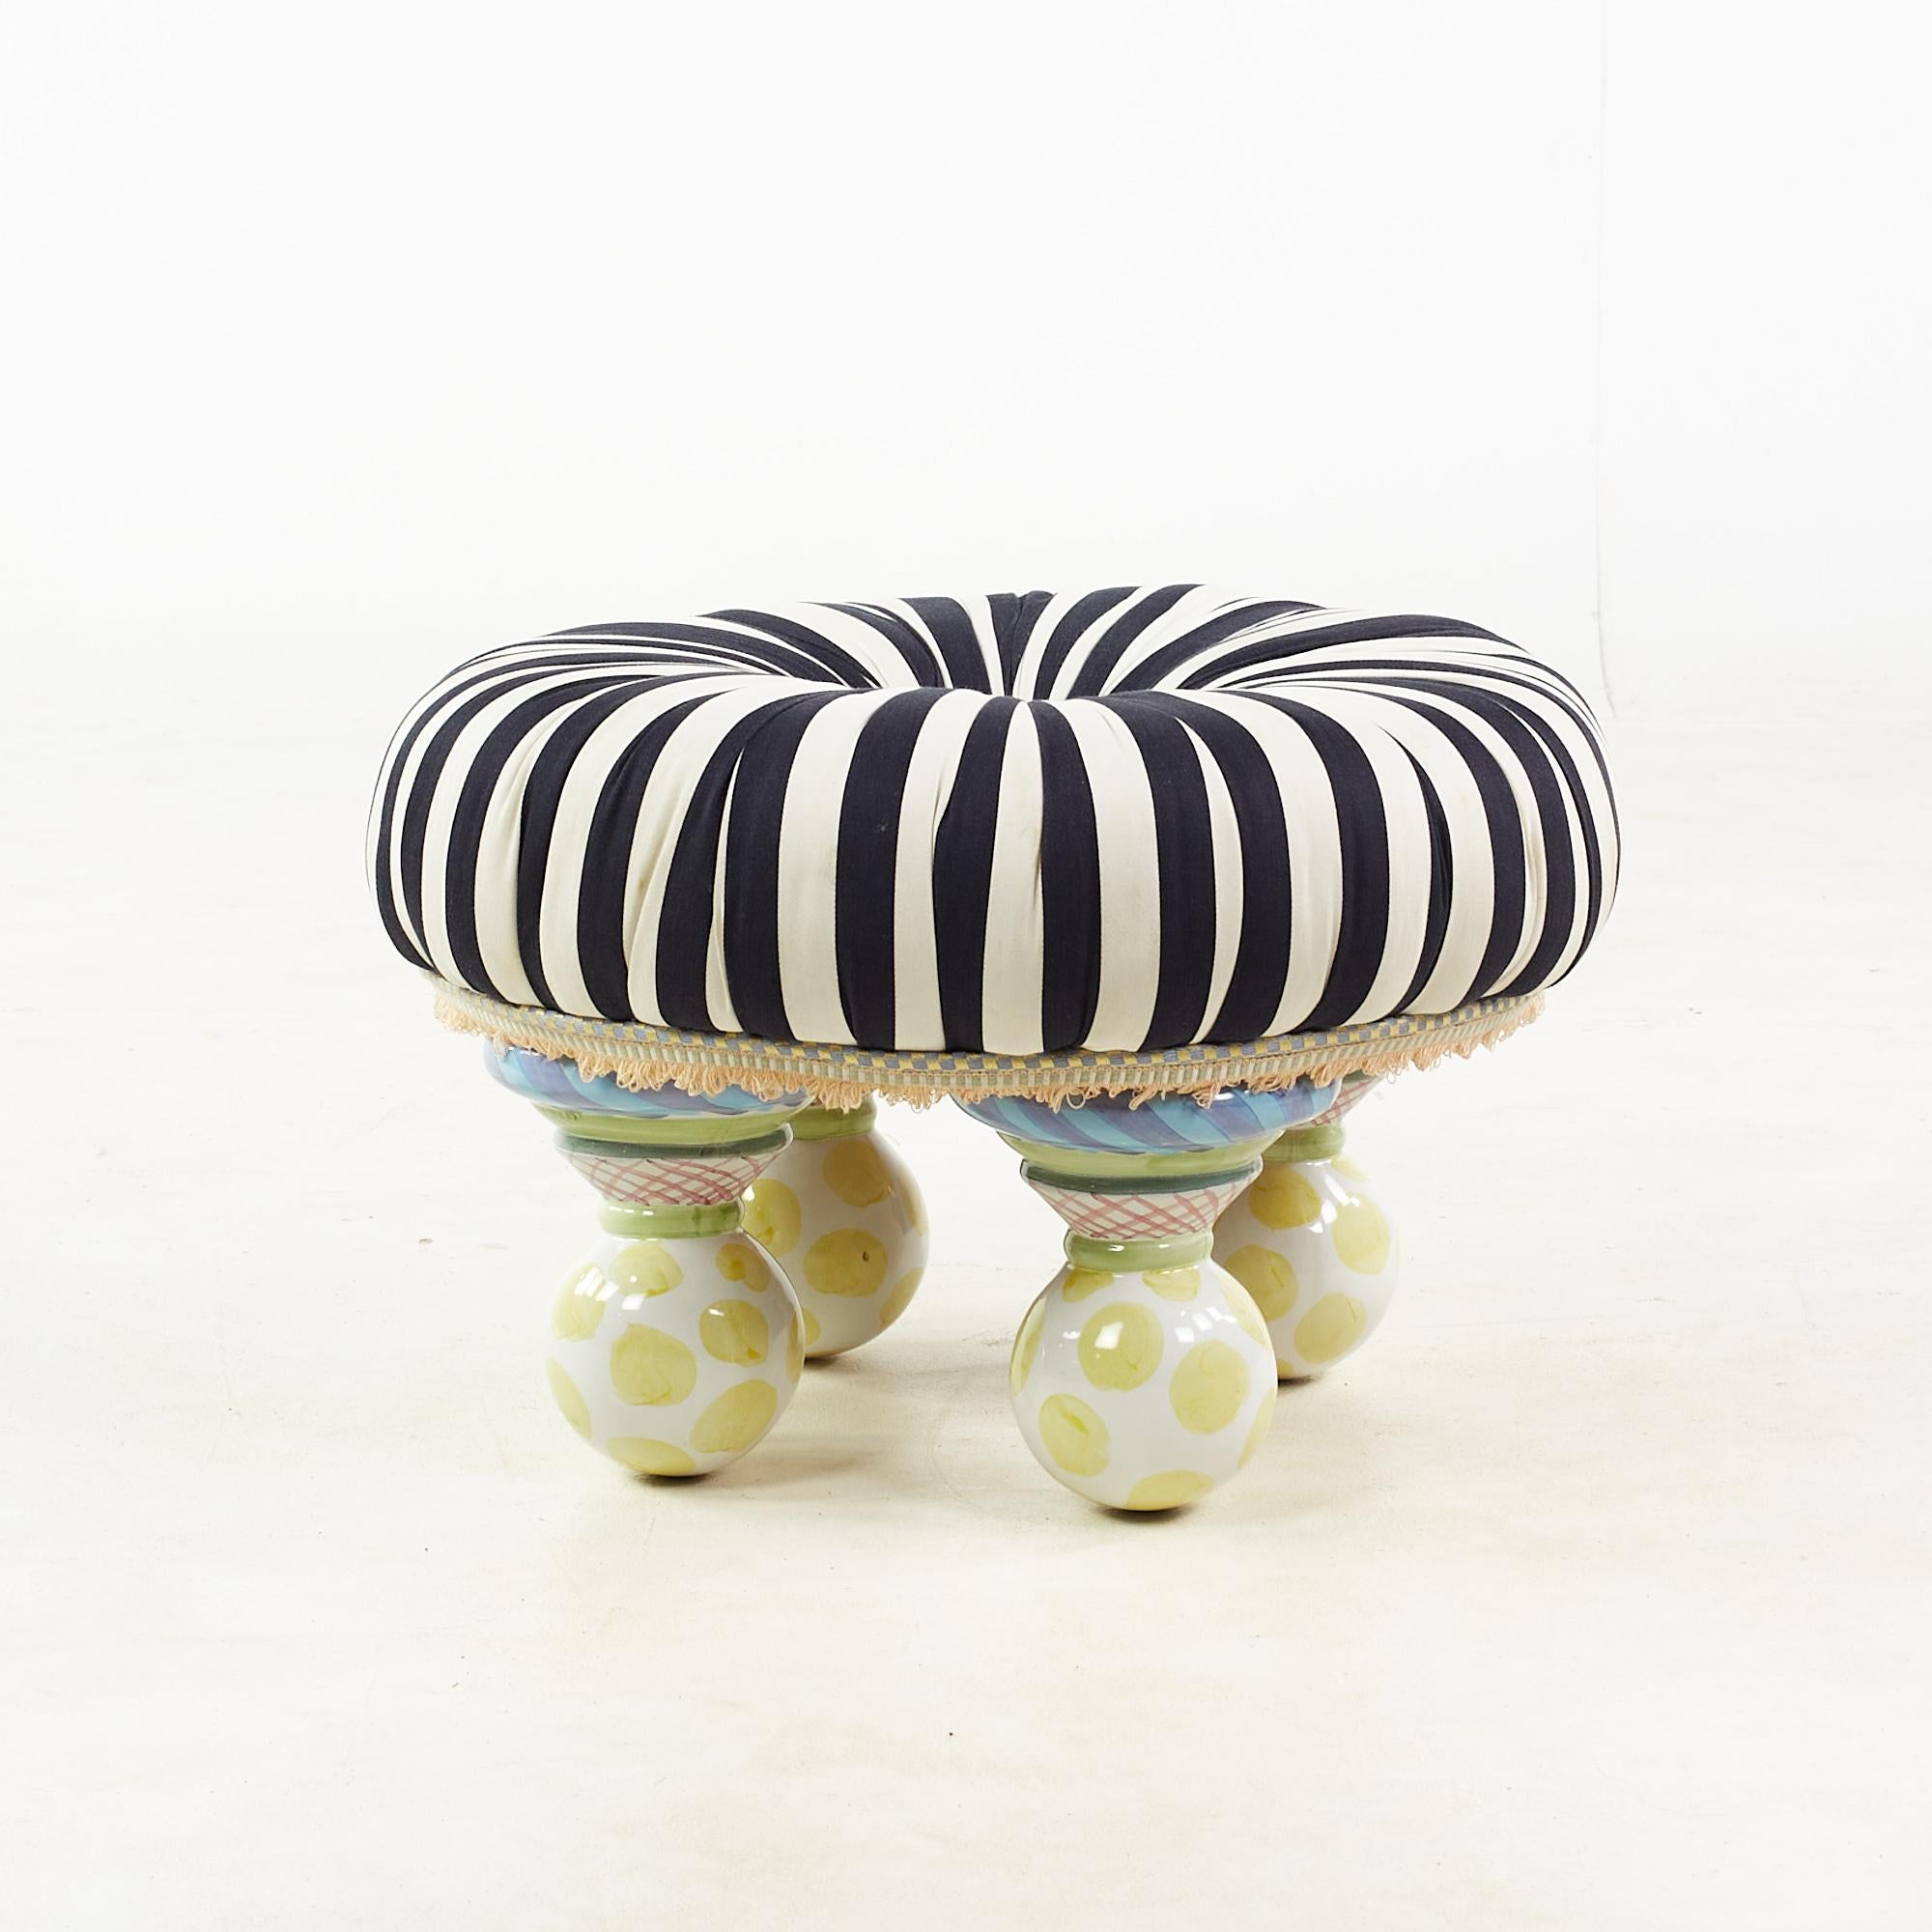 MacKenzie Childs Contemporary Ottoman with Hand Painted Porcelain Legs 1